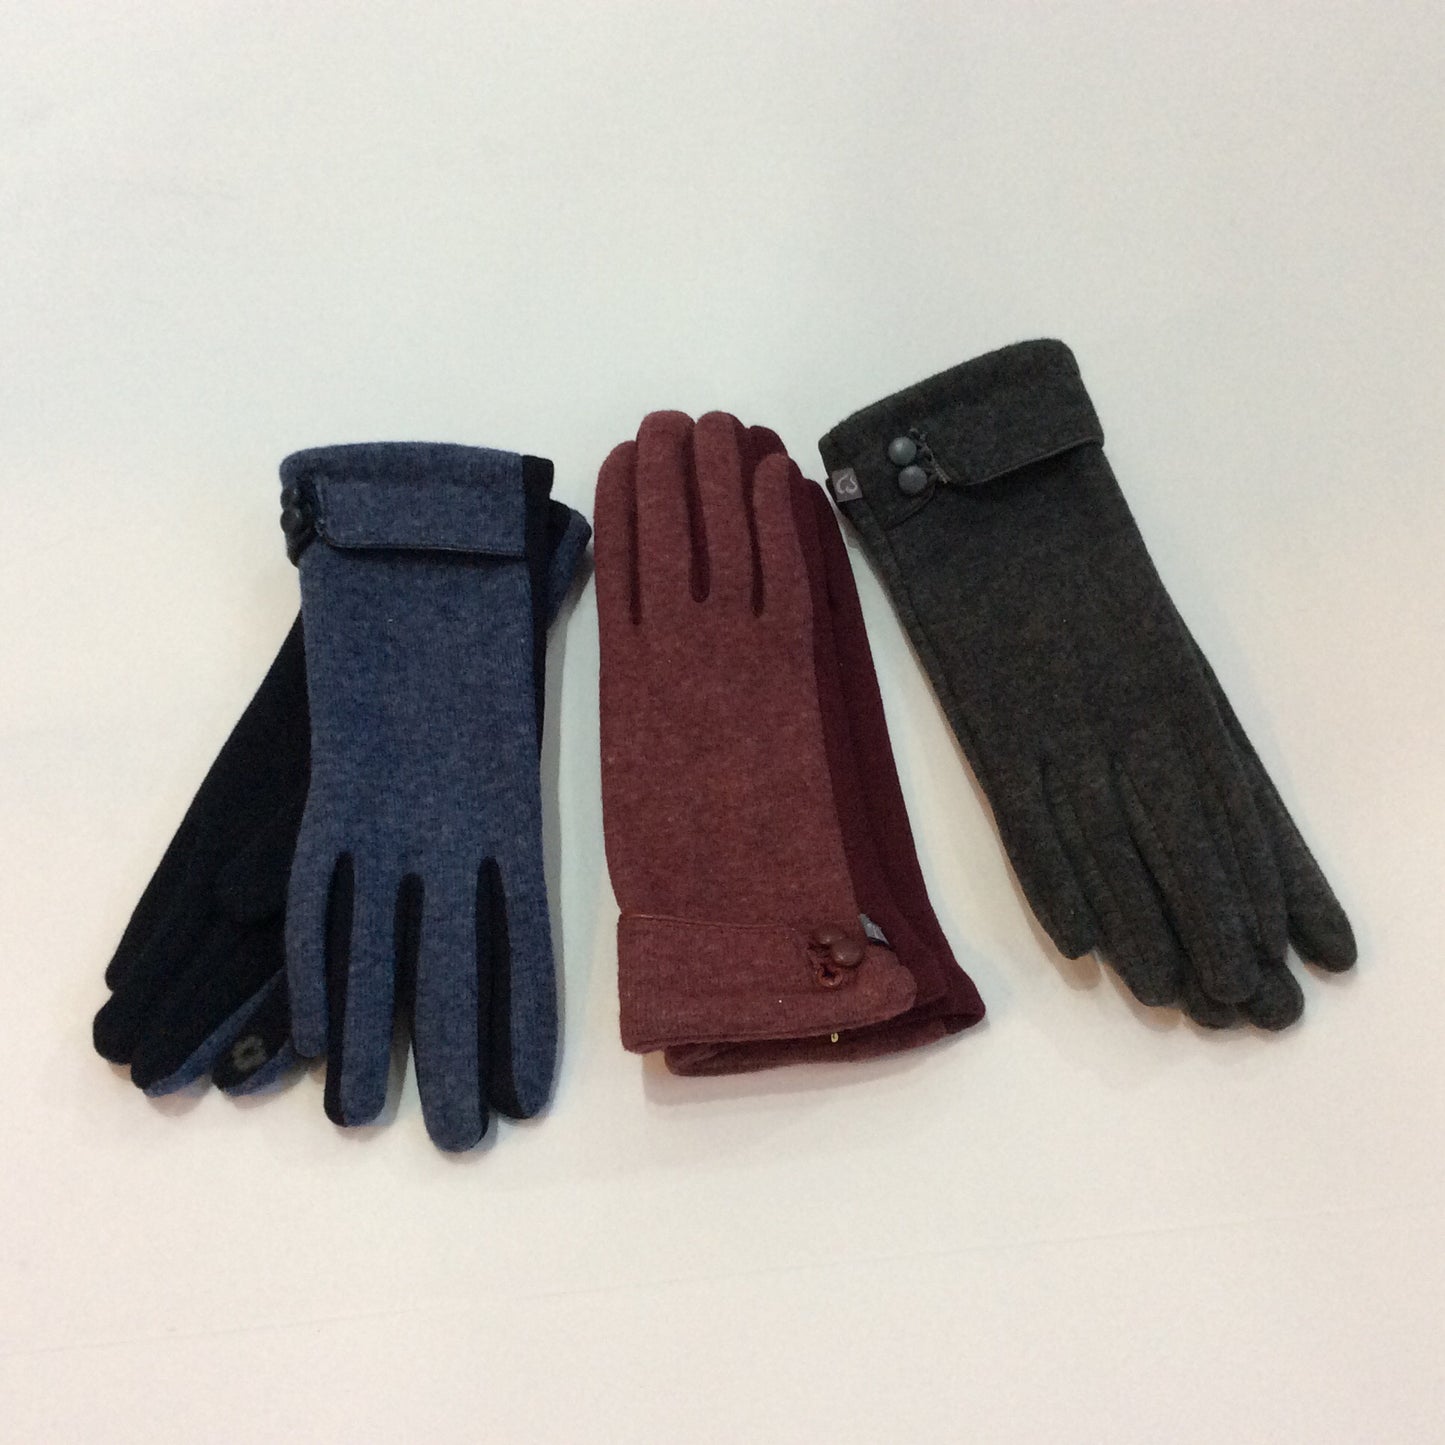 Knit gloves with 2 leather button trim